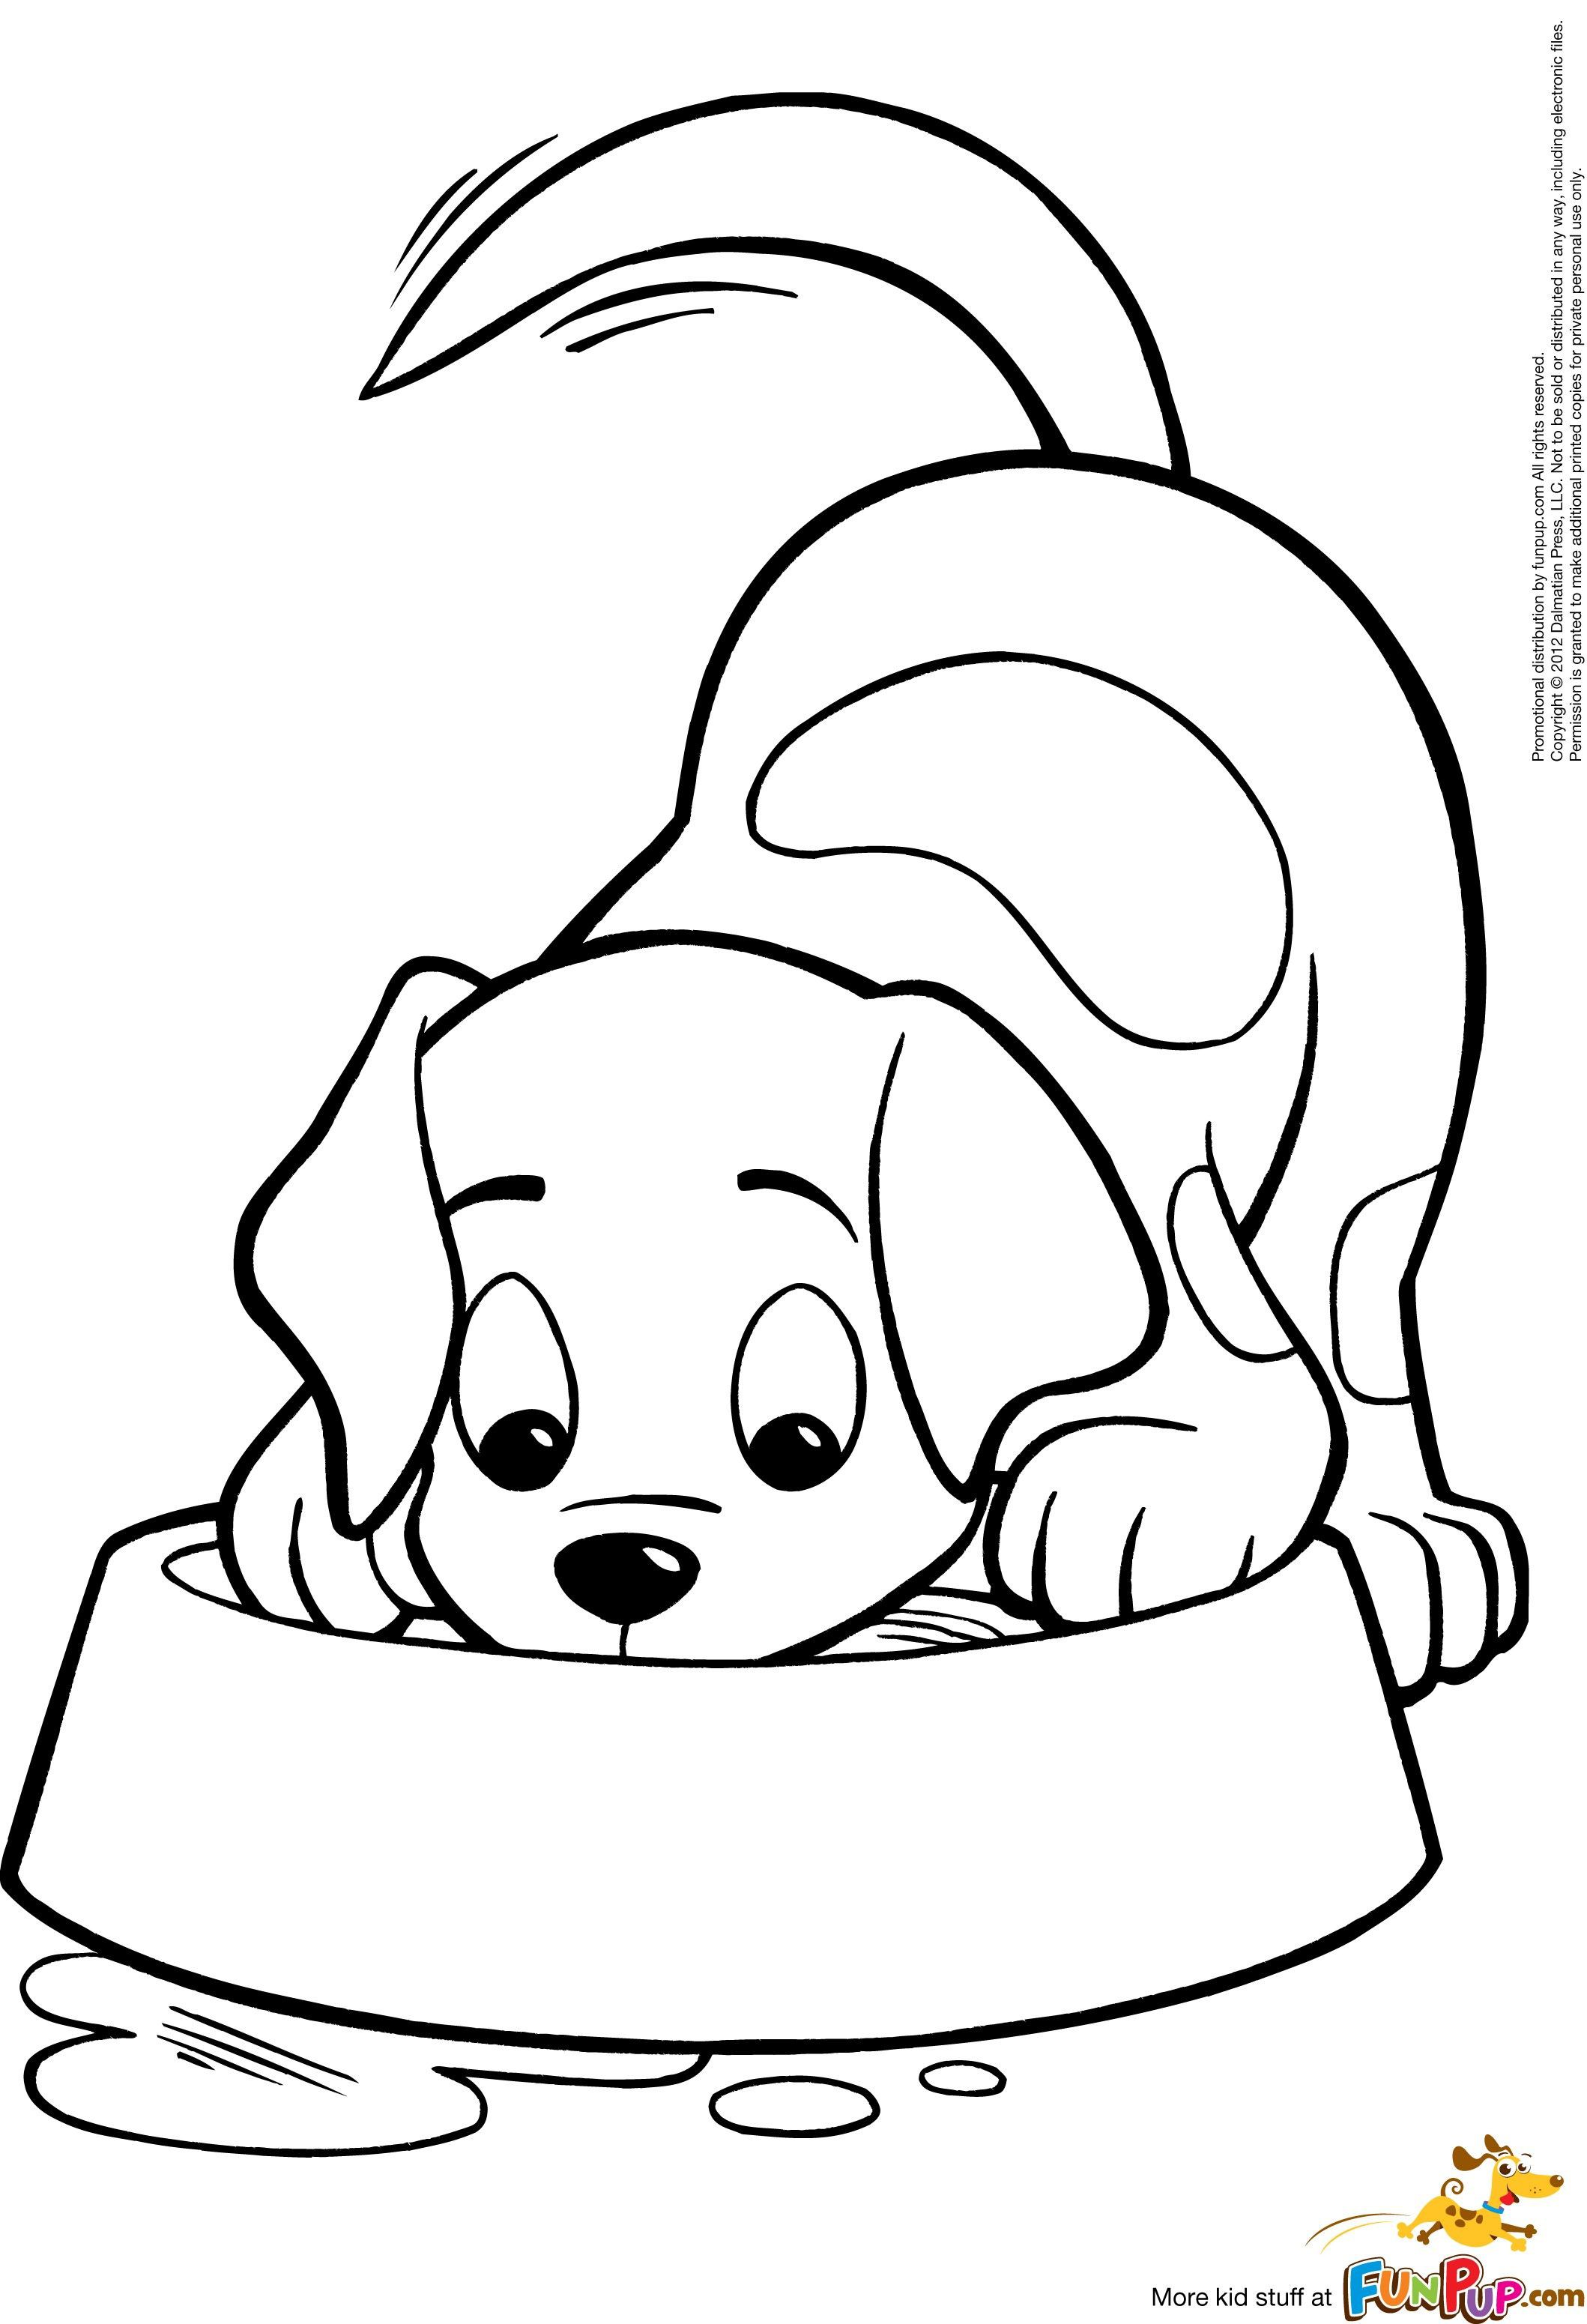 Dog Coloring Pages Bing